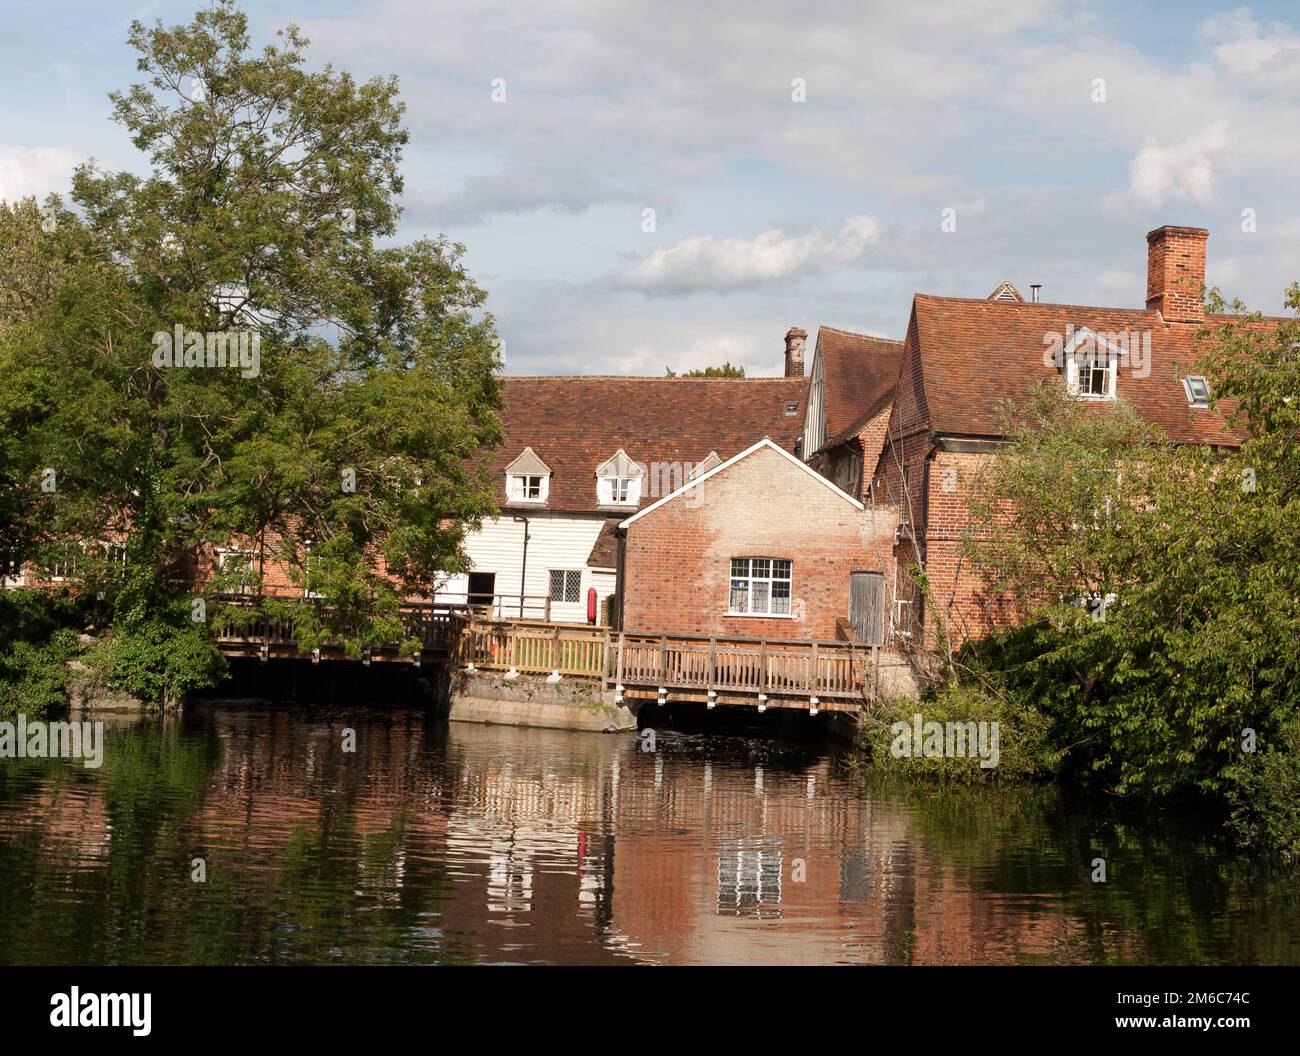 Beautiful old historic buildings mill in england reflected in running river Stock Photo